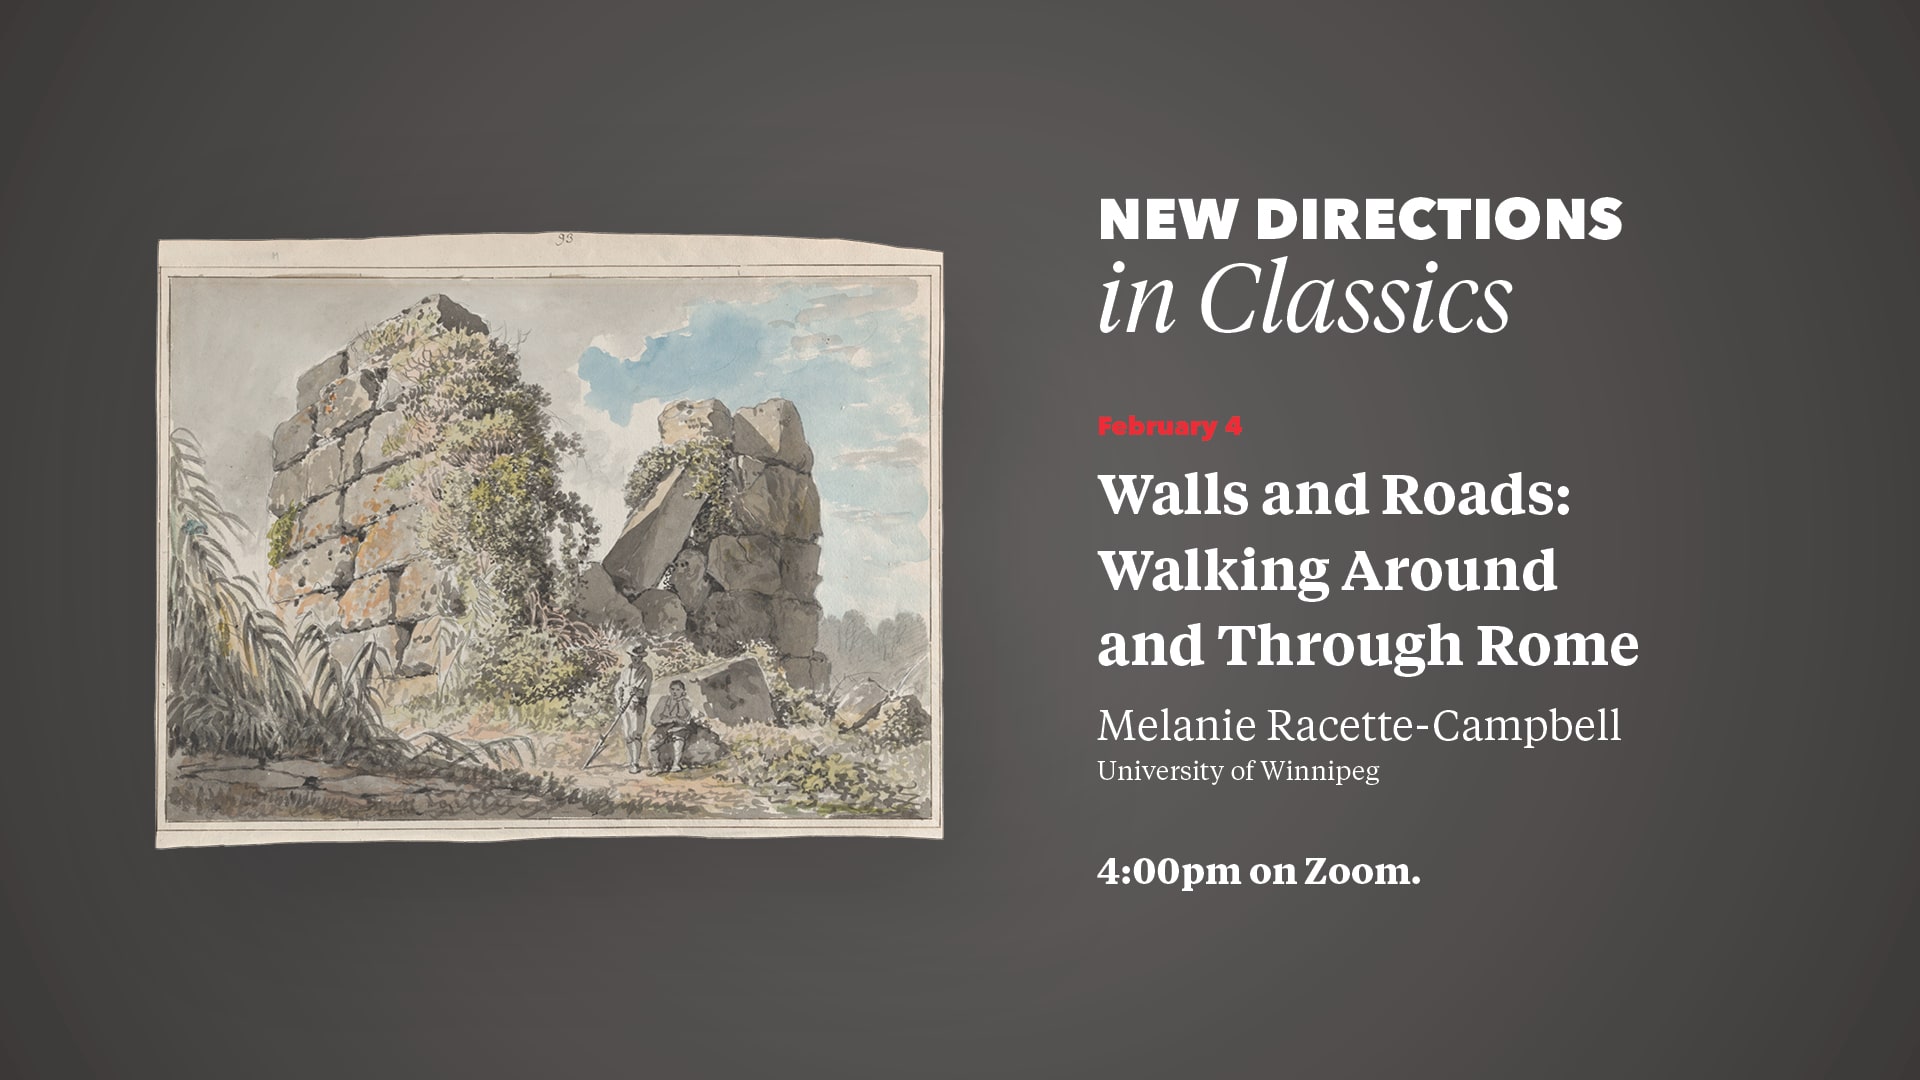 Promo image for New Directions in Classics lecture on Feb 4, full text on web page